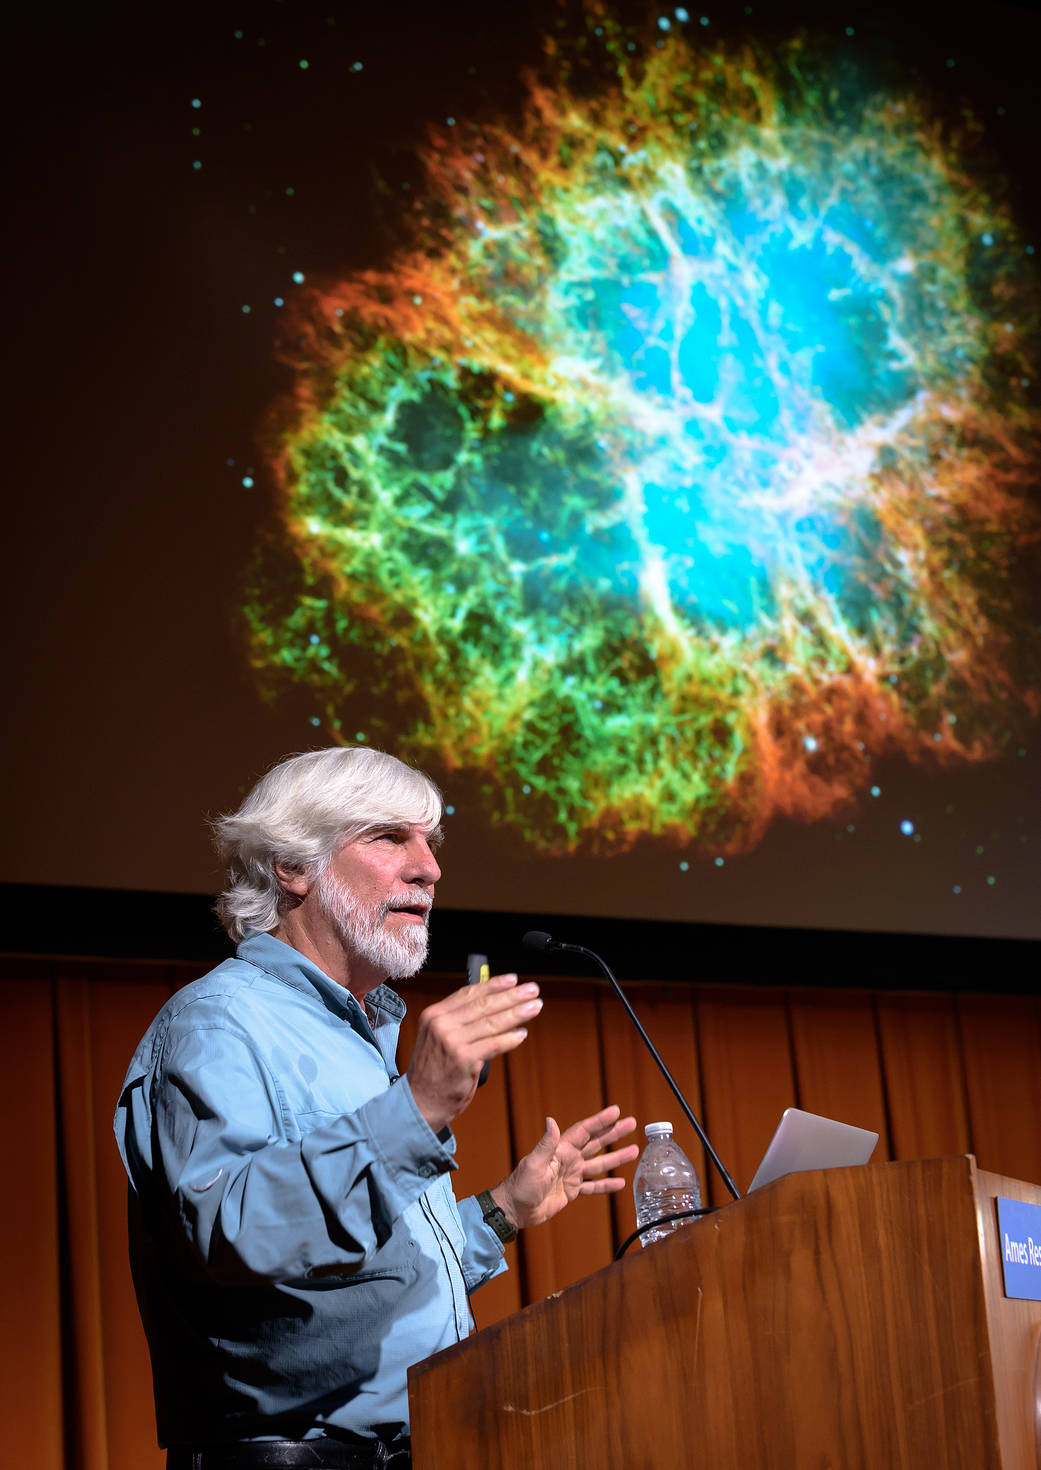 Stephen Johnson: The Wonder of Photography, Nature and the Cosmos